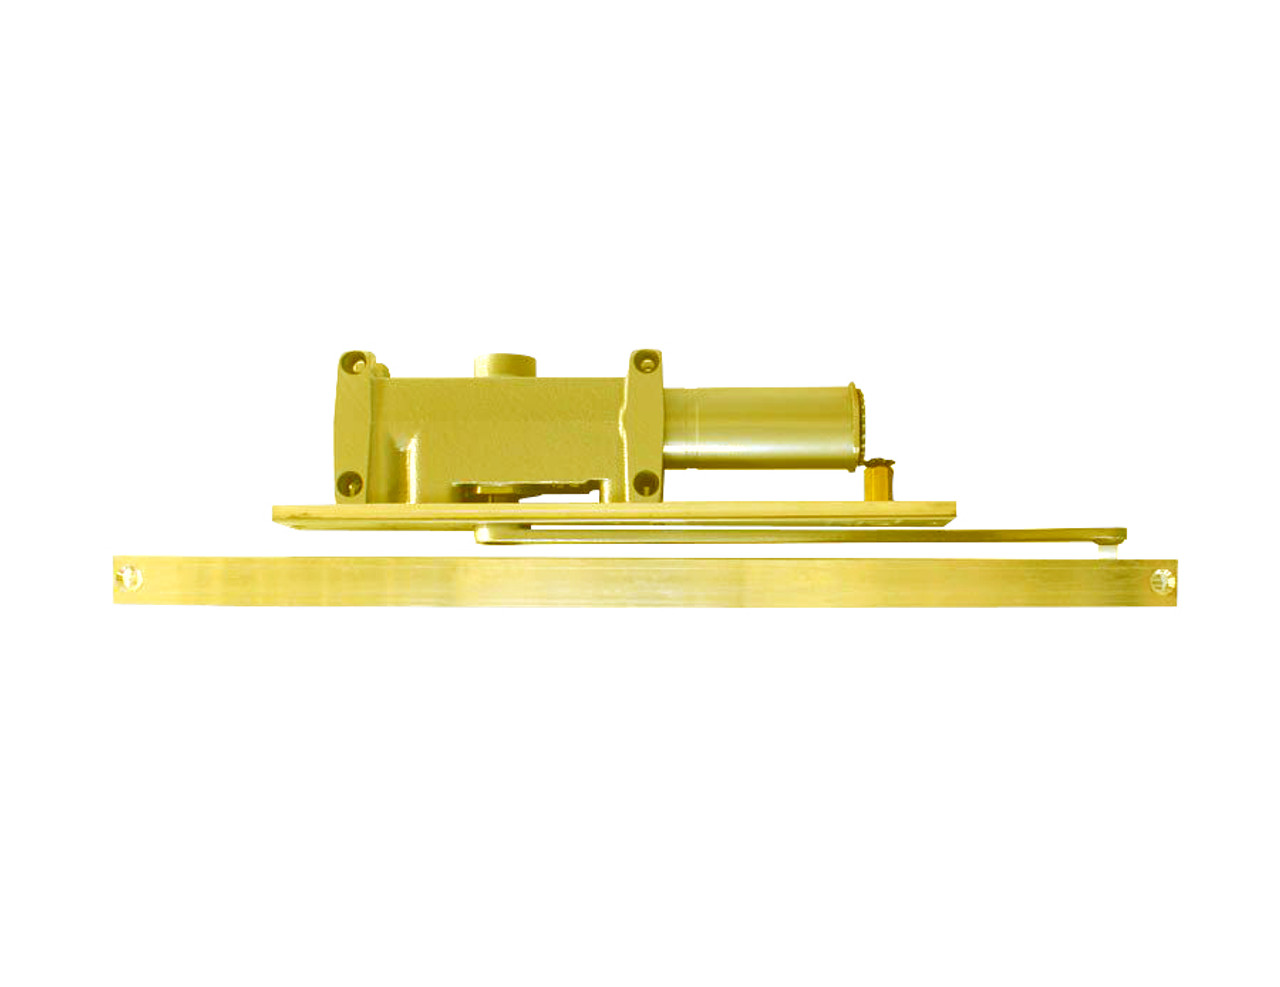 5016-H-LH-BRASS LCN Door Closer with Hold Open Arm in Brass Finish